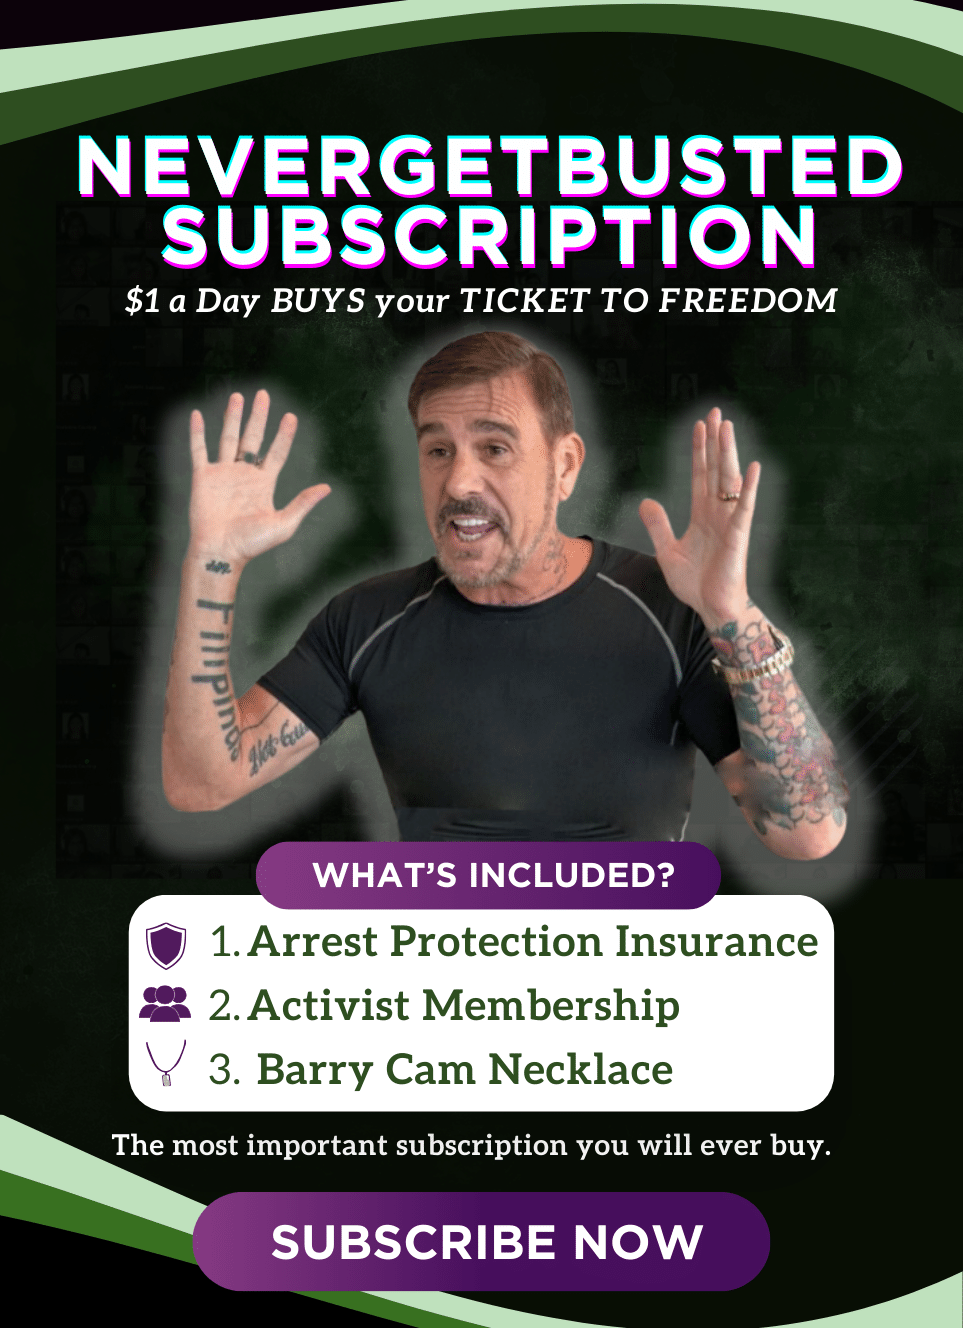 ad for ngb subscription mobile